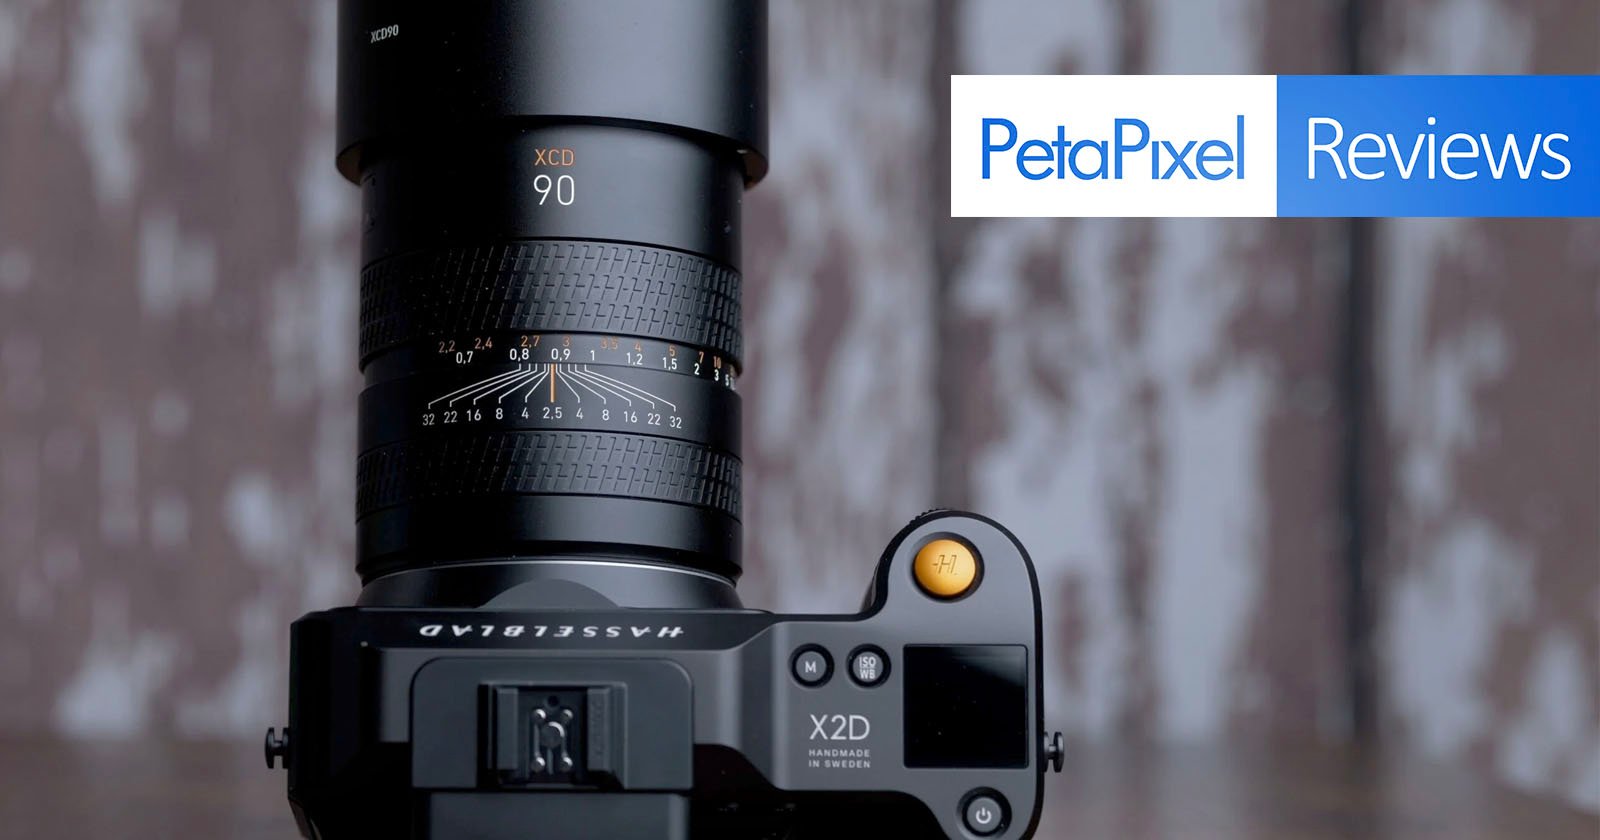 A hasselblad x2d camera with a large lens attached, positioned on a wooden surface with a blurred background, showcasing the petapixel reviews logo overlaid on the image.